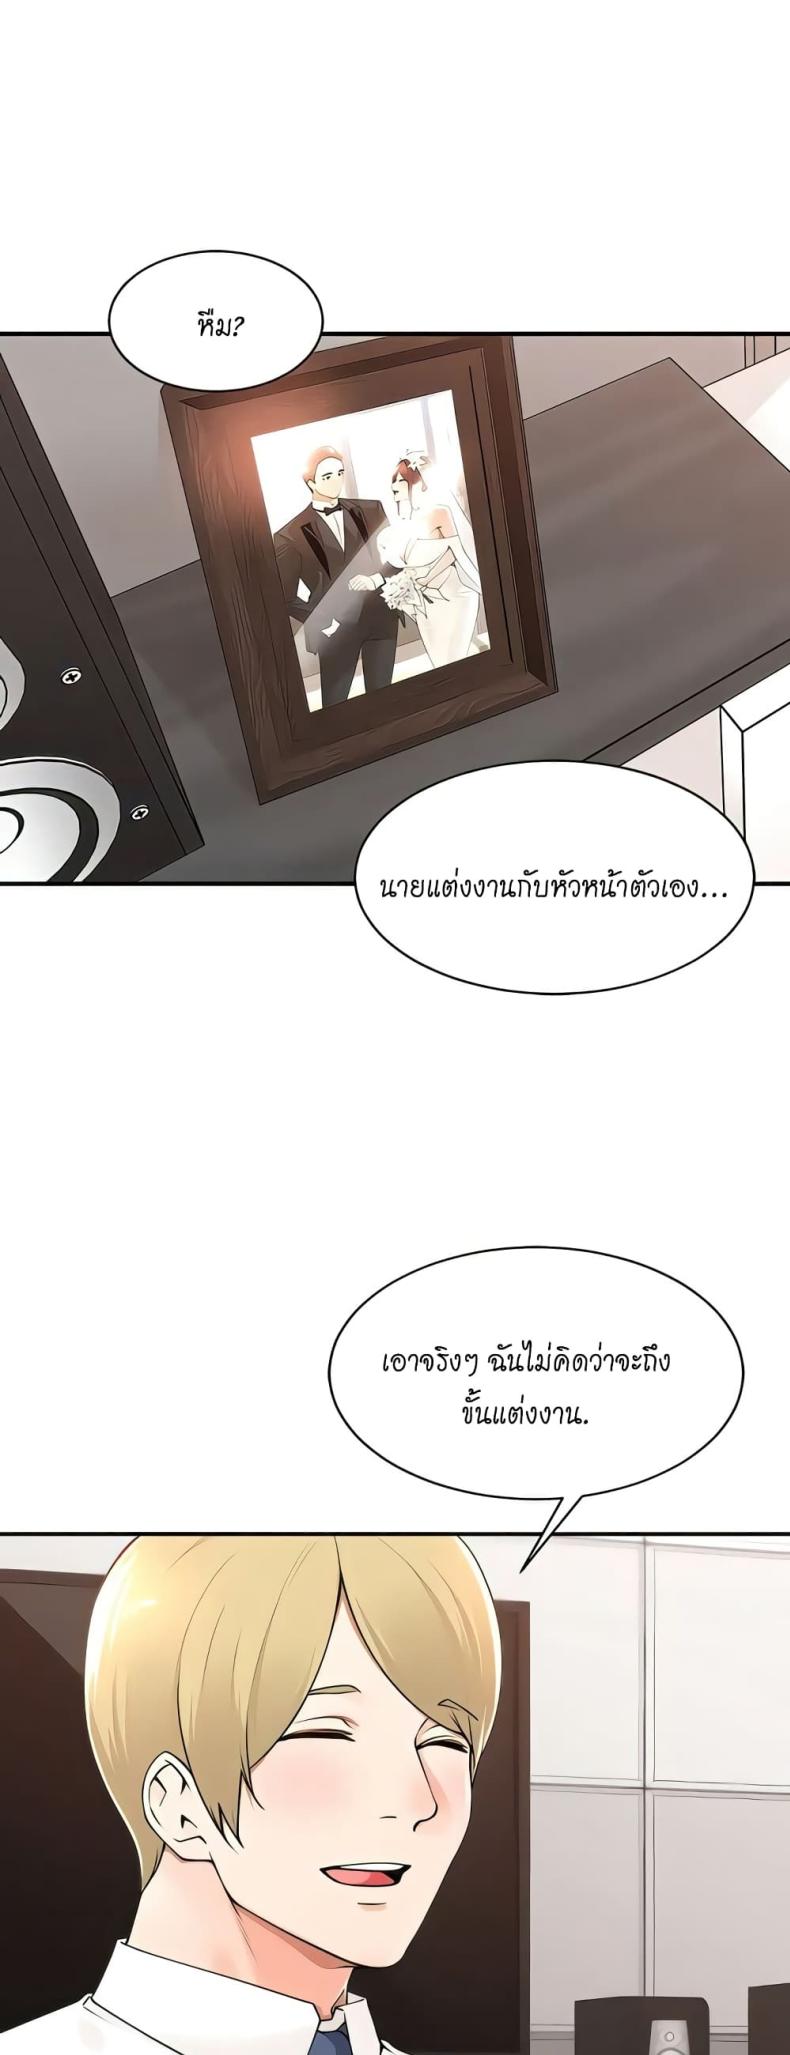 Manager, Please Scold Me 38 ภาพที่ 2